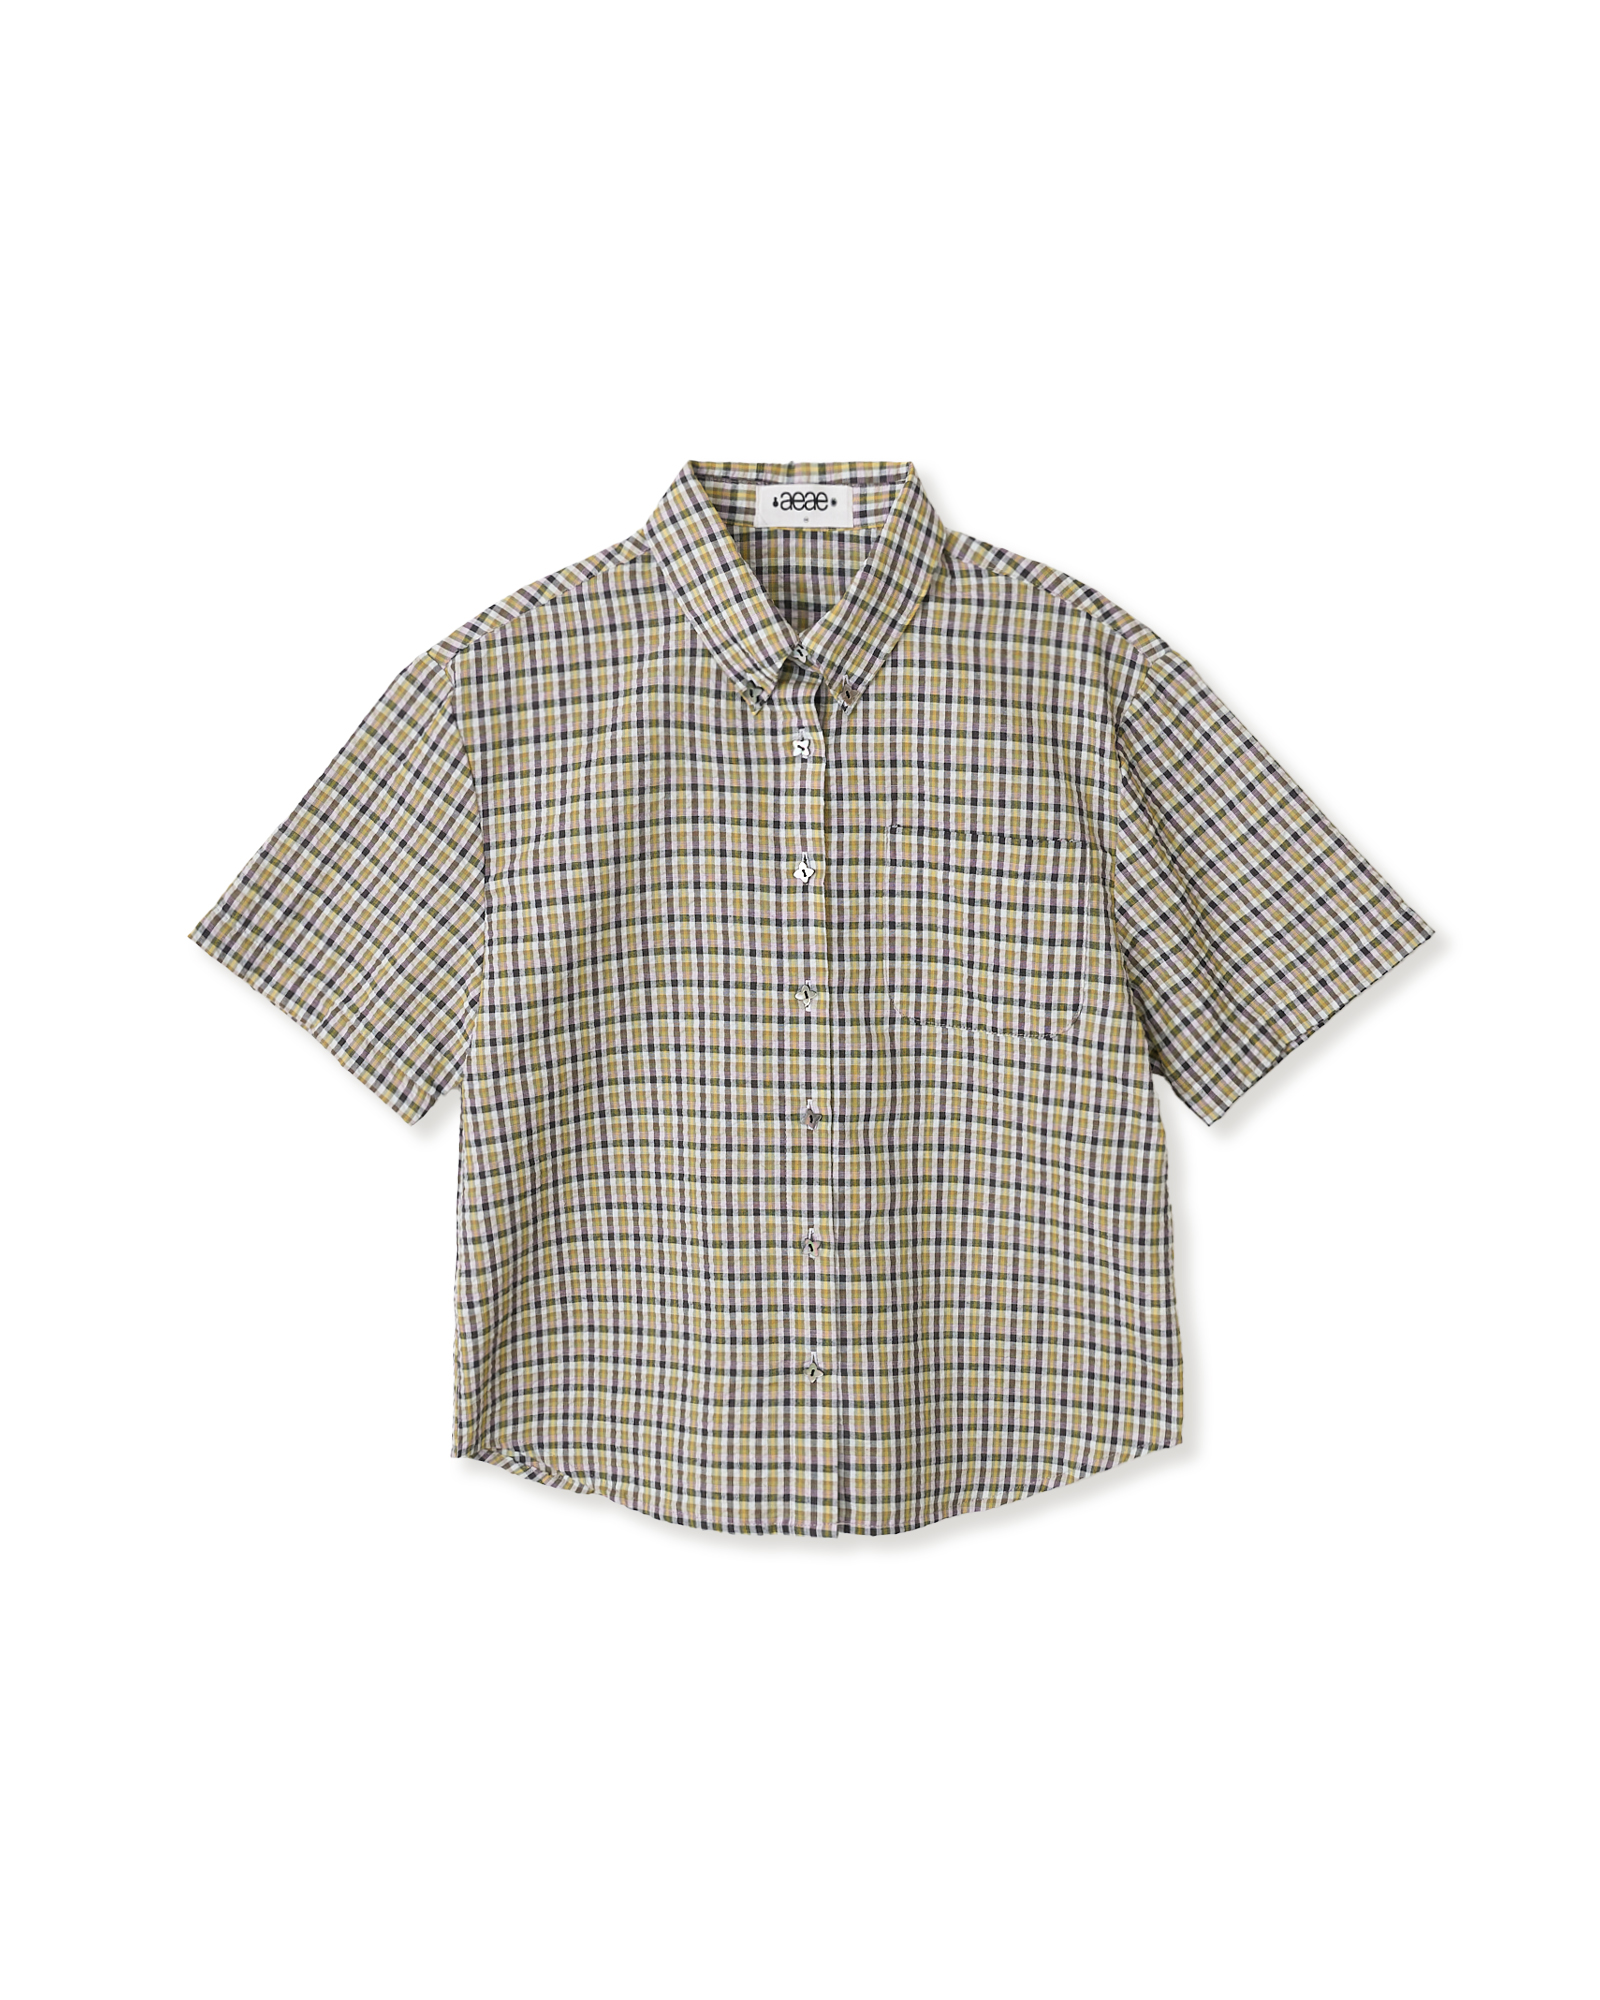 FLOWER BUTTON CHECK SHIRTS [YELLOW]